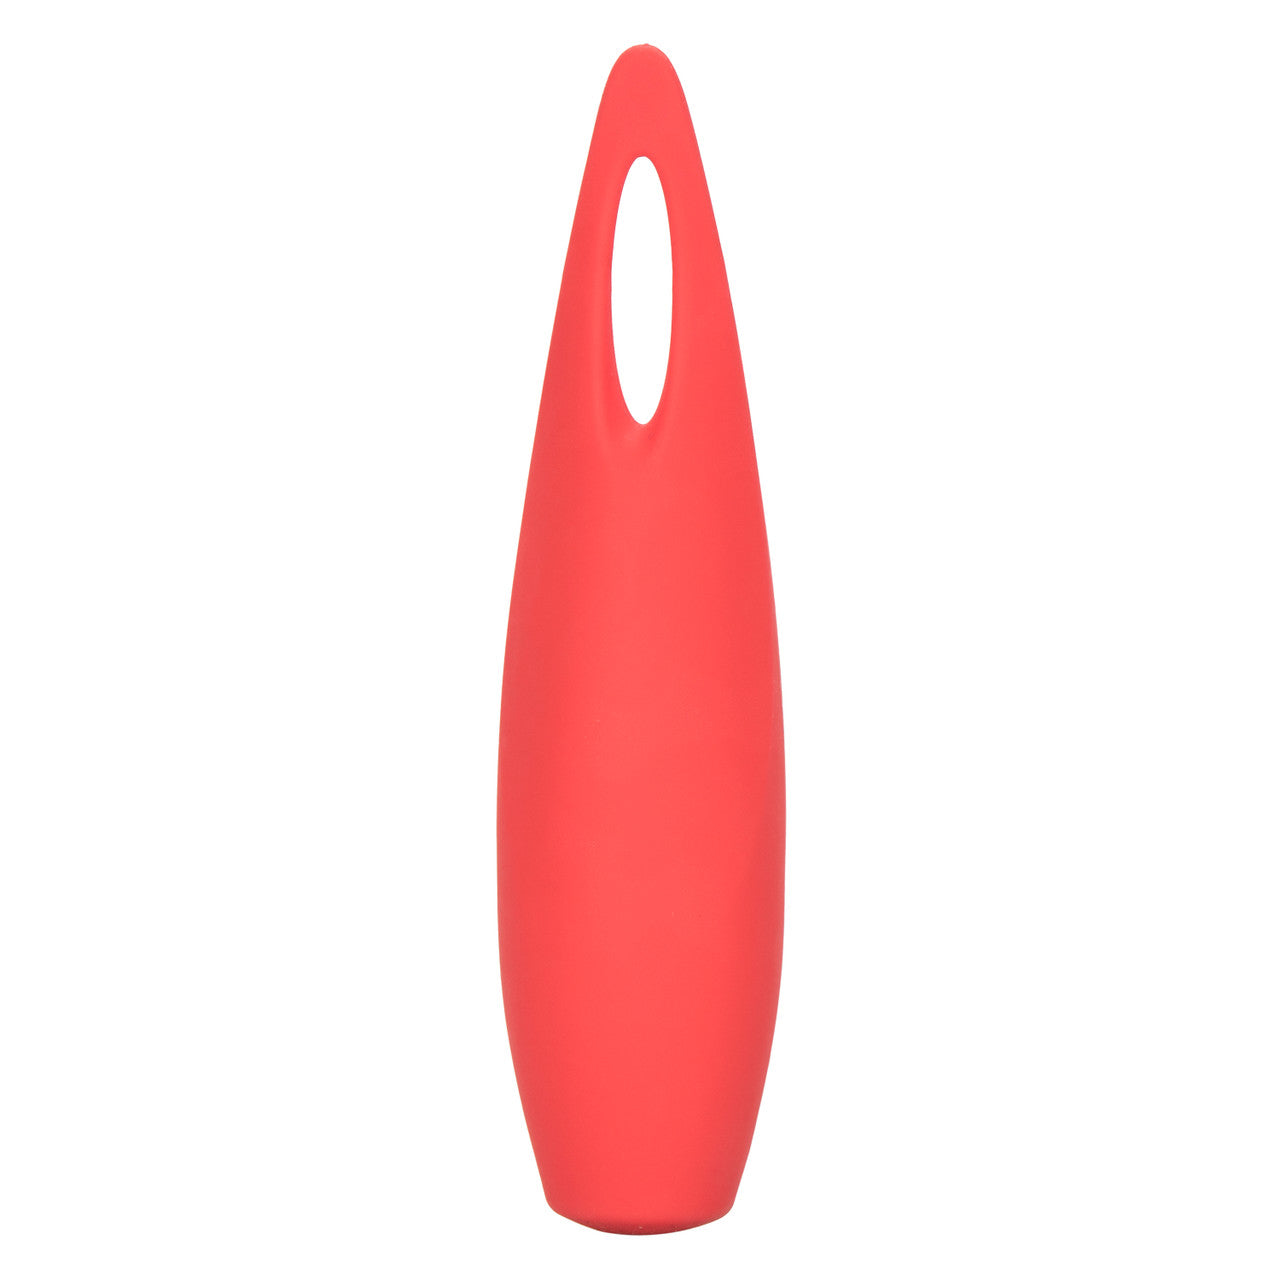 Vibromasseur clitoridien rechargeable en silicone Red Hot Fury 